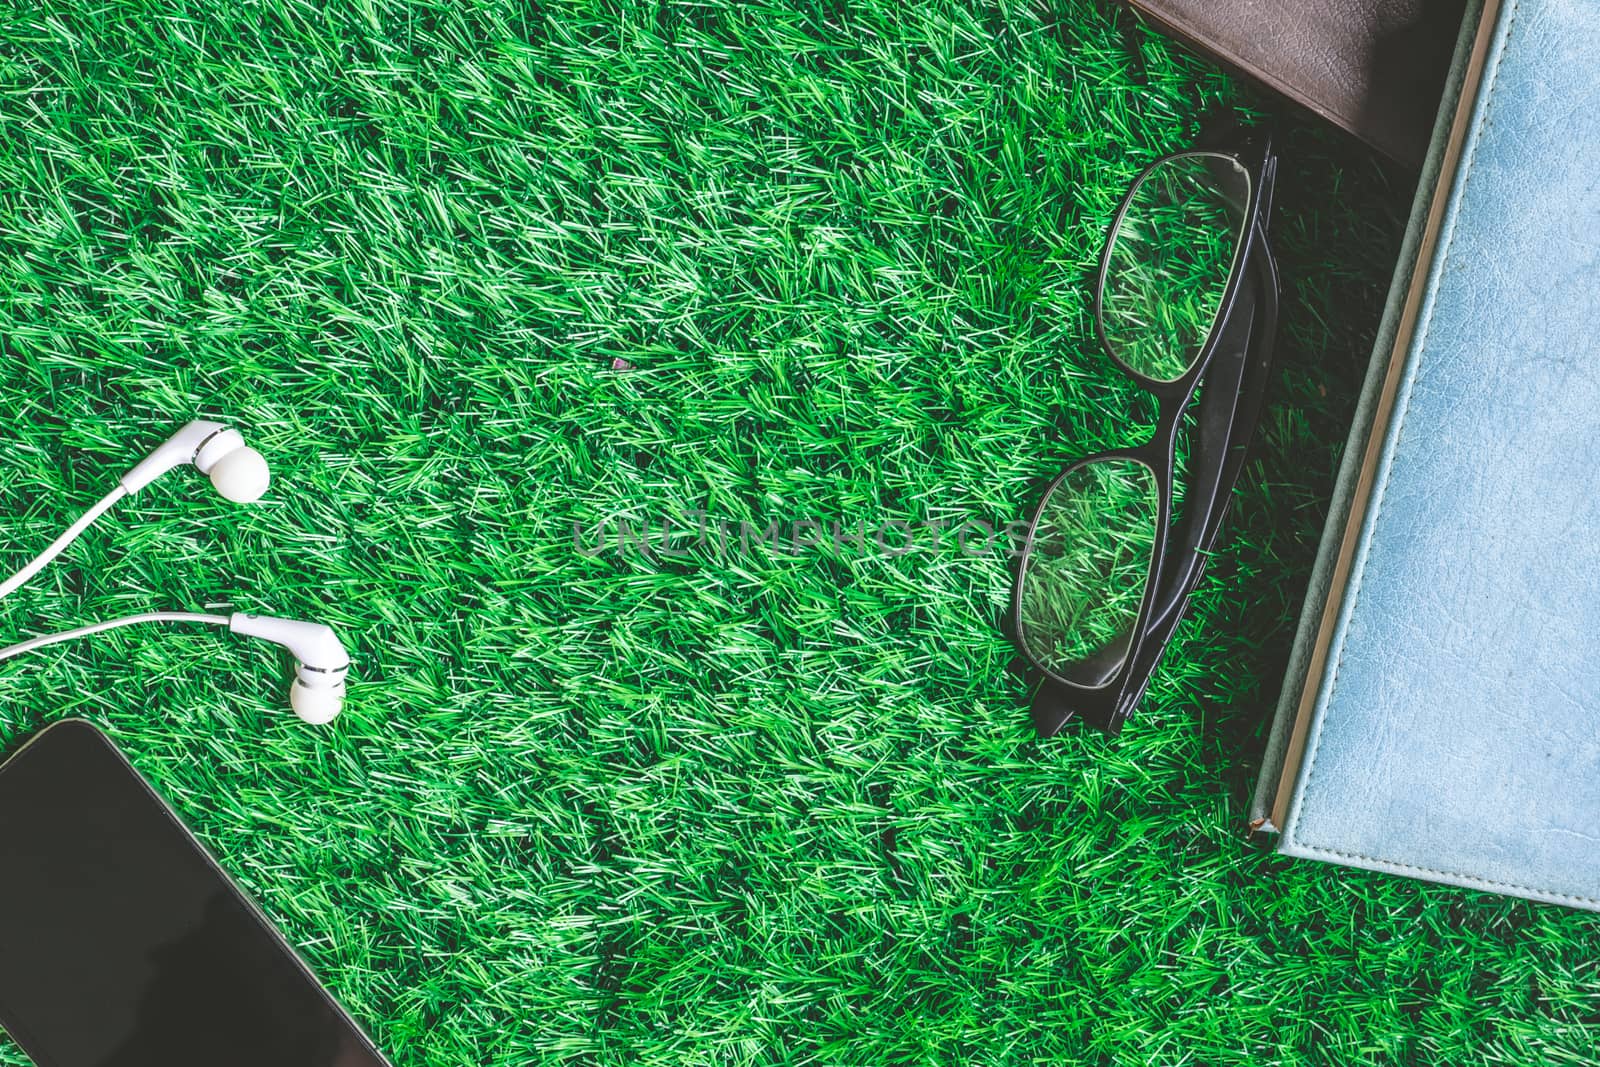 Top view of books with glasses, smart phone and earphones on green grass background.